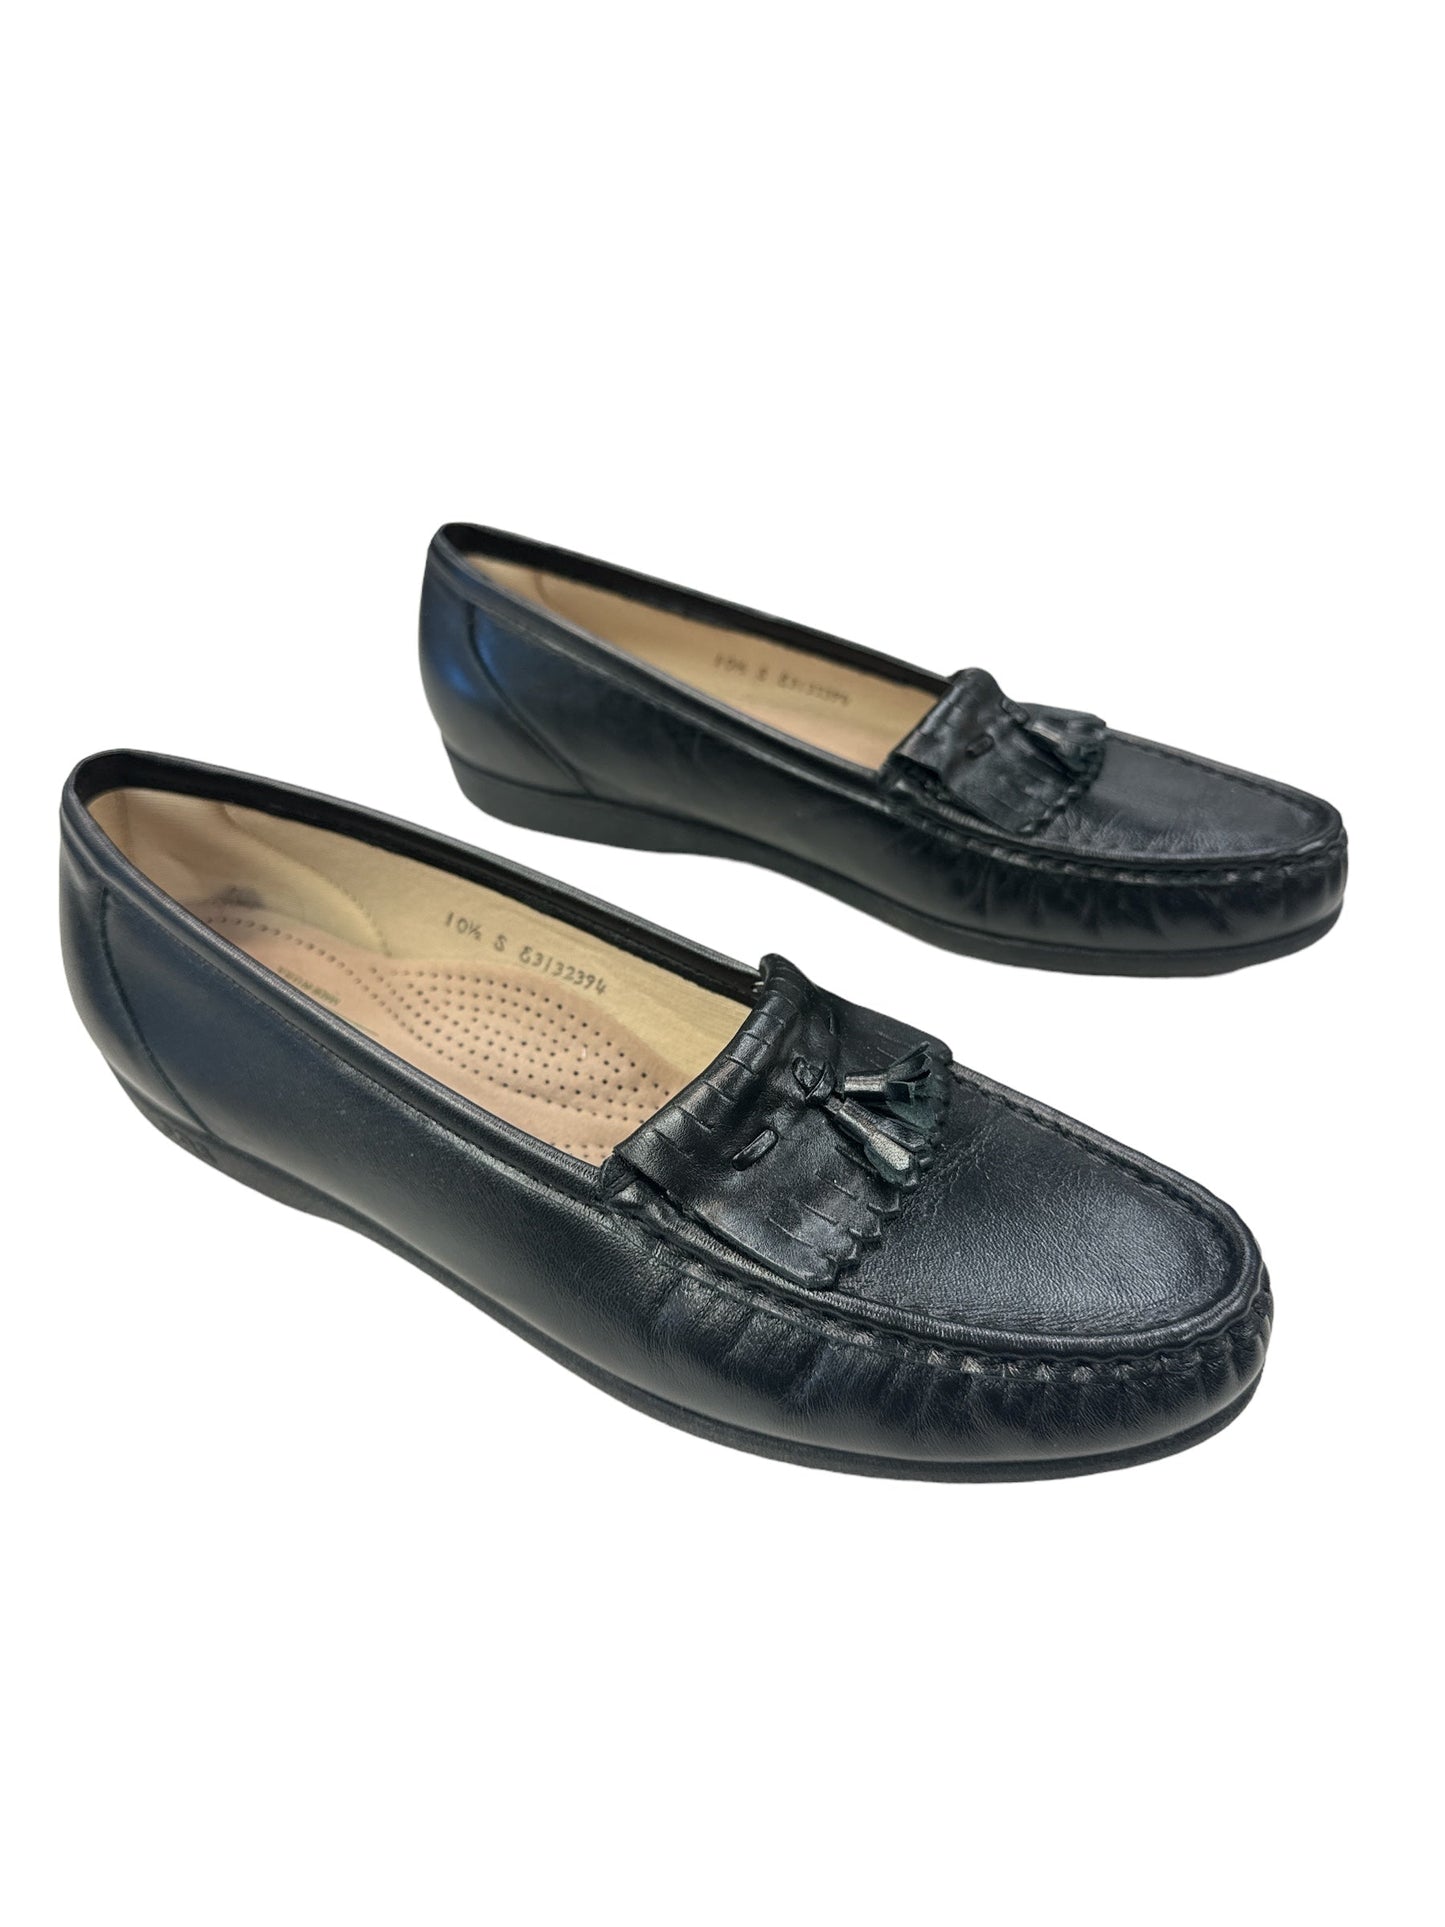 Shoes Flats By Sas  Size: 10.5